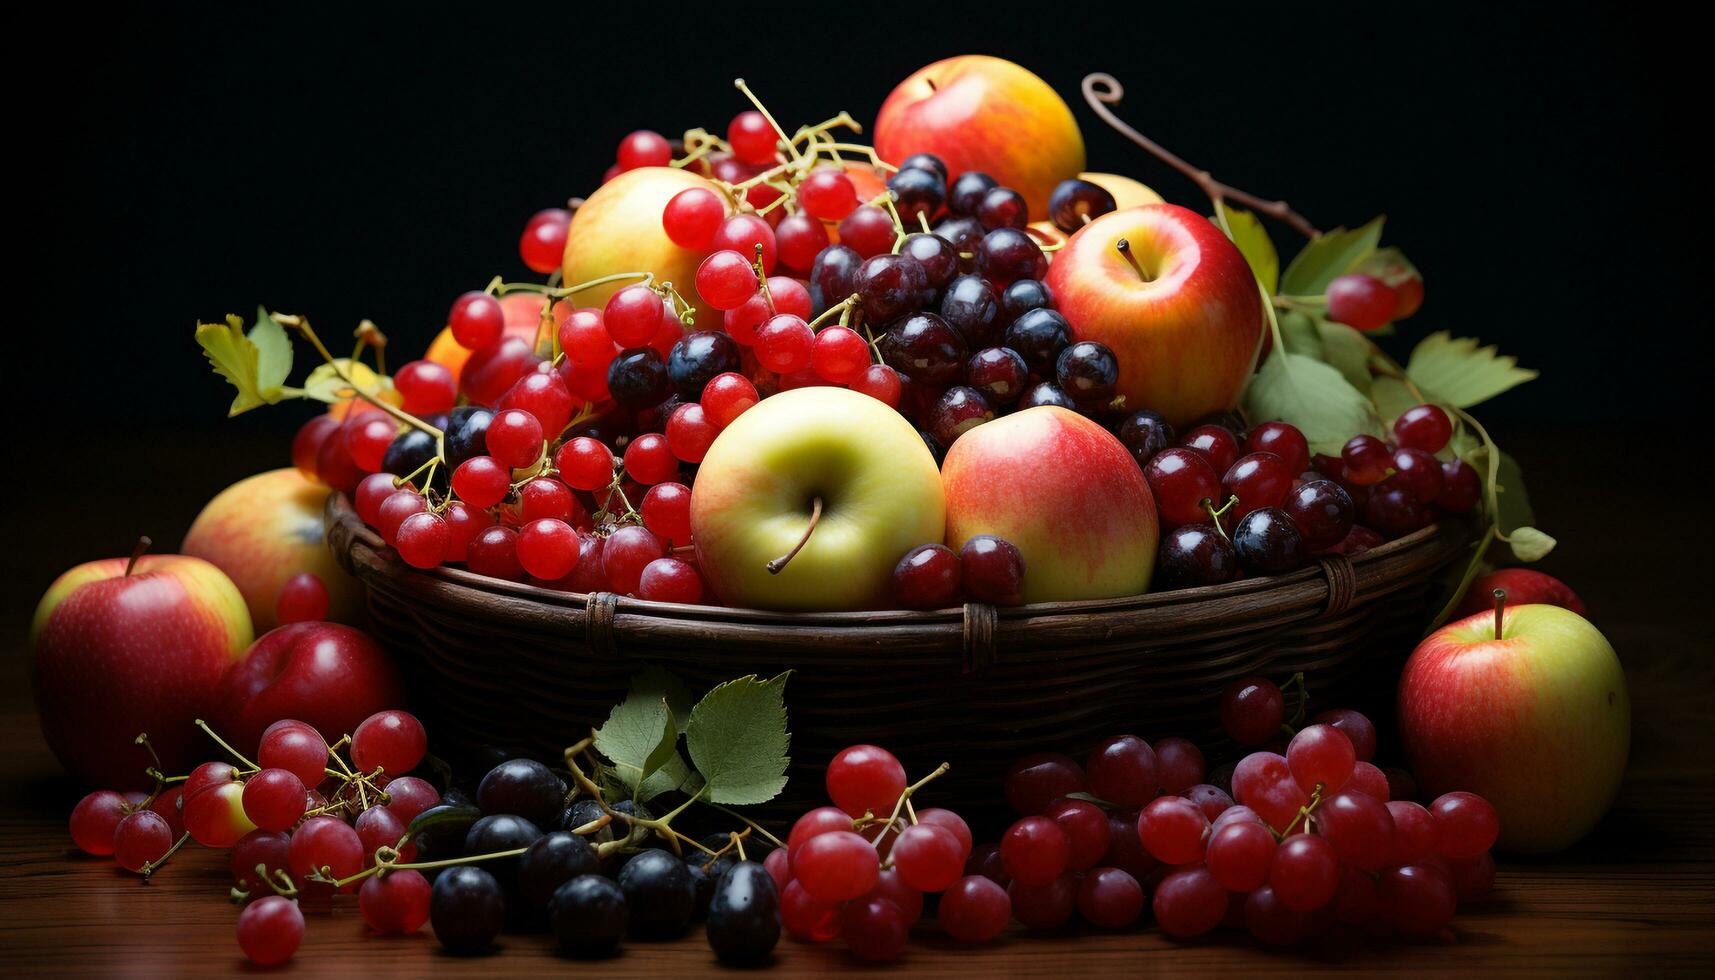 Freshness and nature in a basket of organic, ripe fruit generated by AI photo